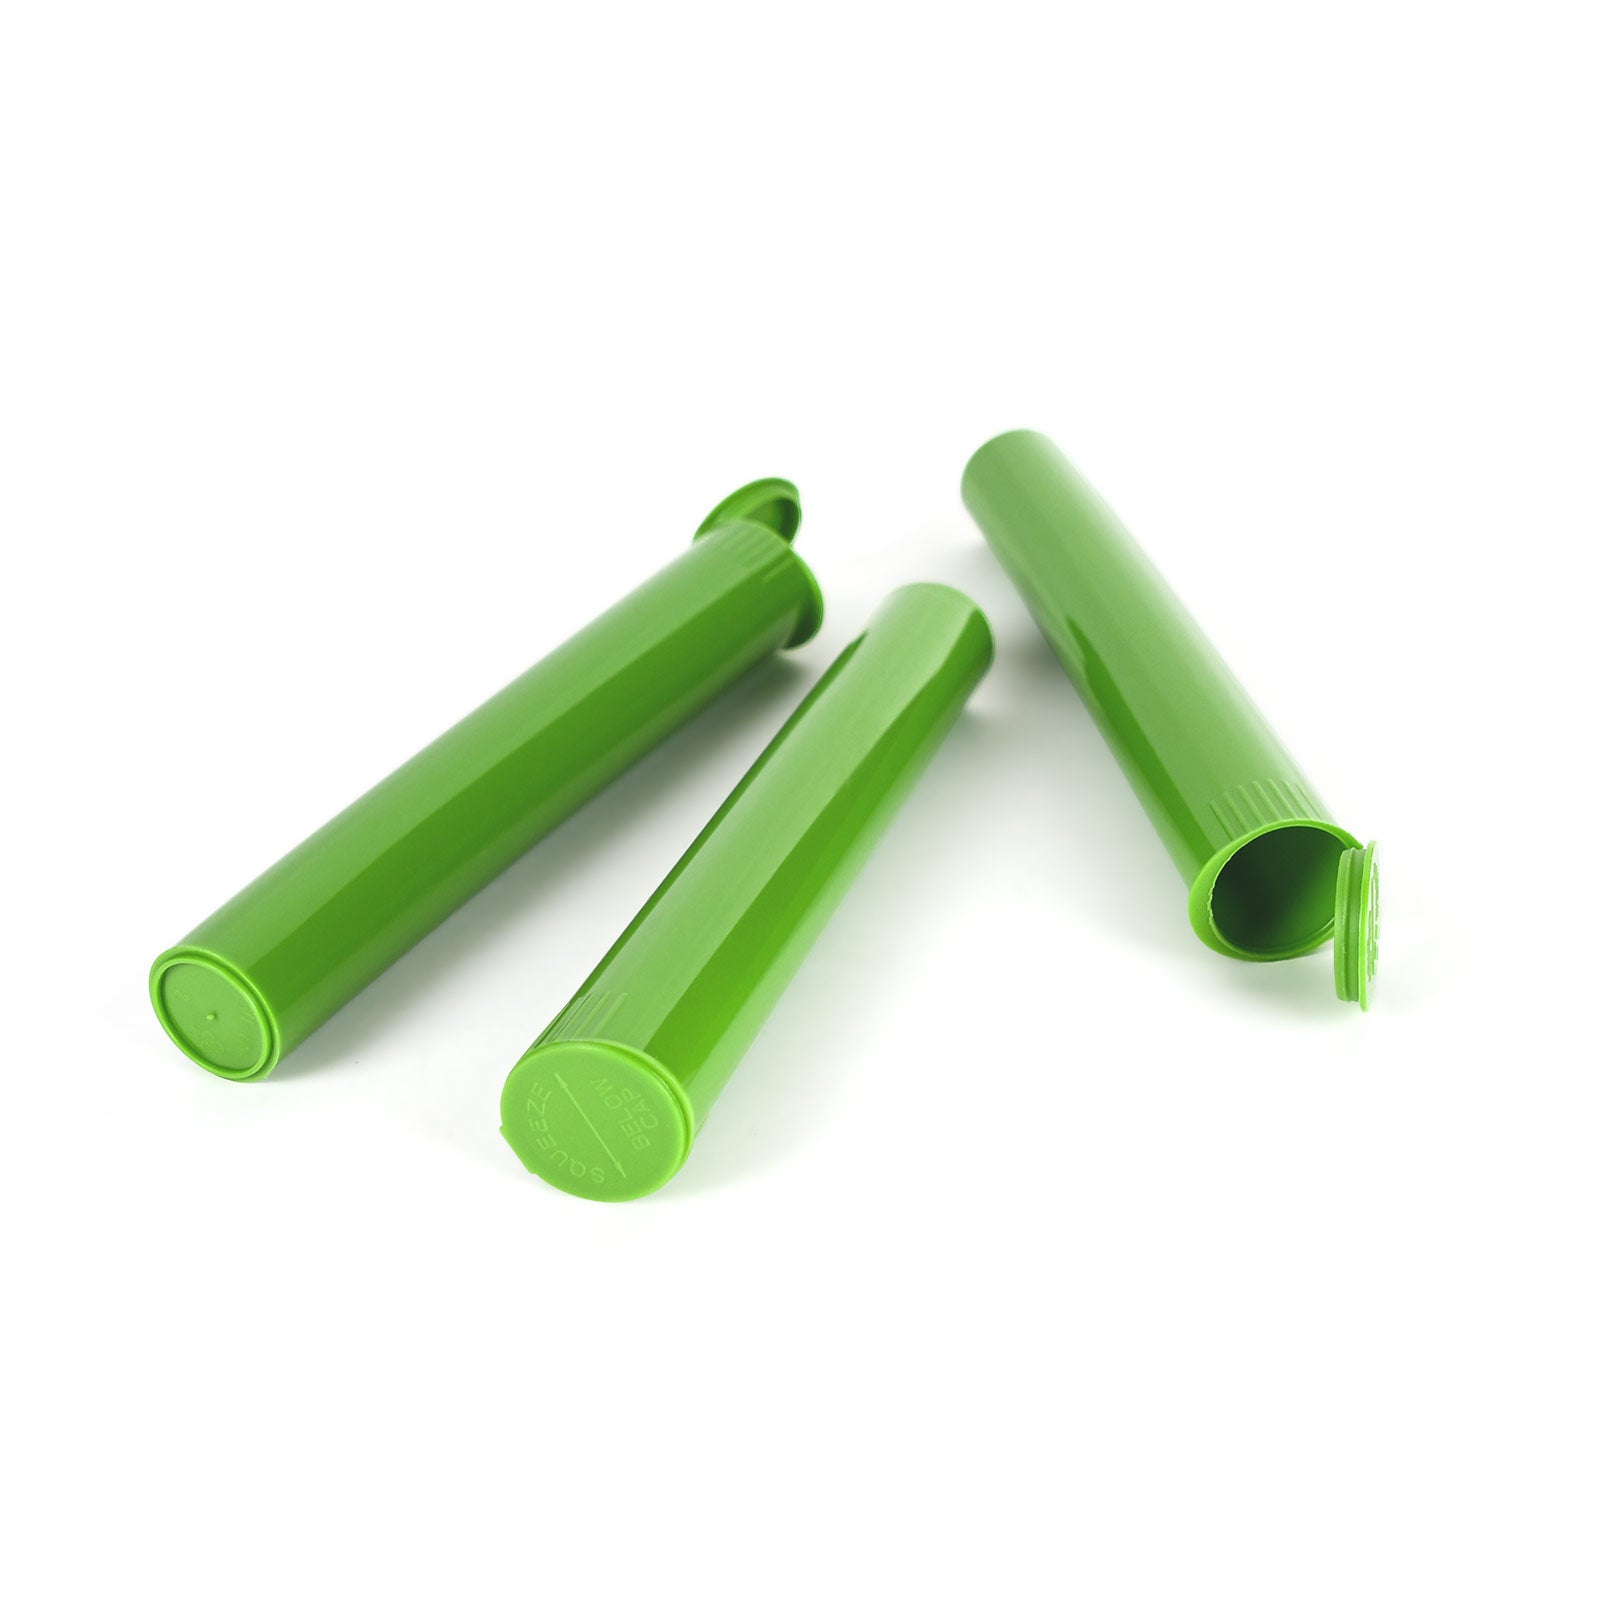 120mm Rx Squeeze Tubes Opaque Green - 500 Count